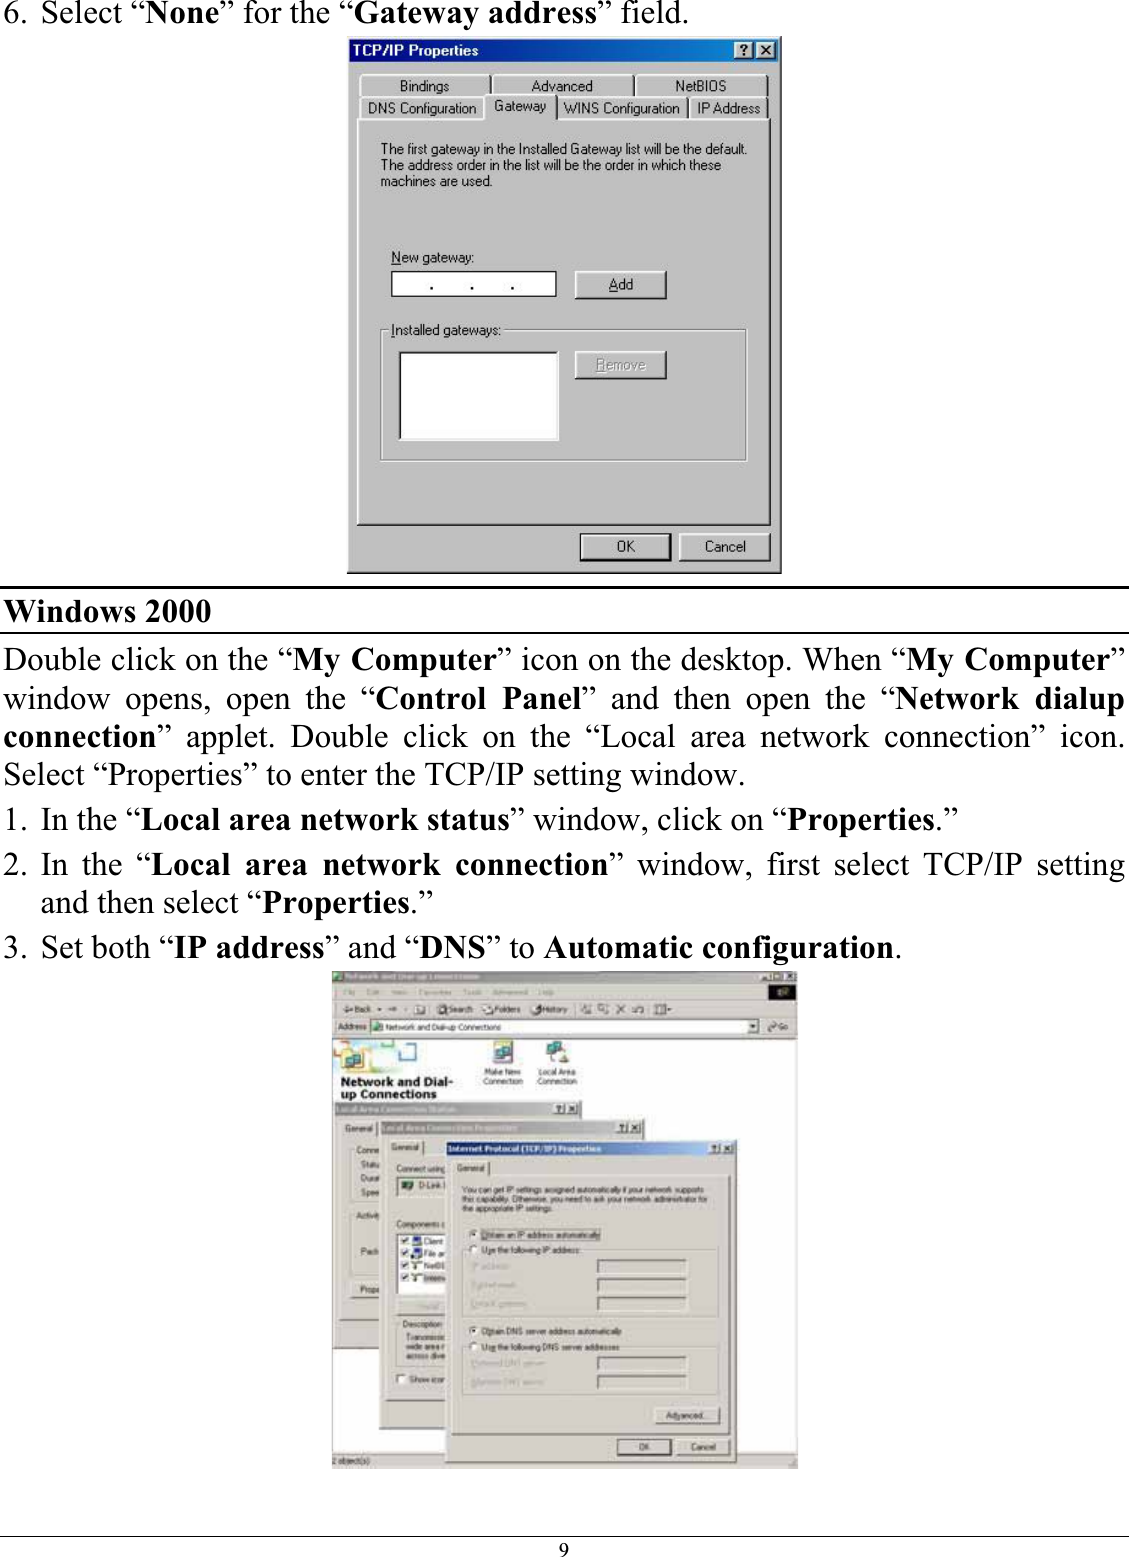 96. Select “None” for the “Gateway address” field. Windows 2000 Double click on the “My Computer” icon on the desktop. When “My Computer”window opens, open the “Control Panel” and then open the “Network dialup connection” applet. Double click on the “Local area network connection” icon. Select “Properties” to enter the TCP/IP setting window. 1. In the “Local area network status” window, click on “Properties.”2. In the “Local area network connection” window, first select TCP/IP setting and then select “Properties.”3. Set both “IP address” and “DNS” to Automatic configuration.